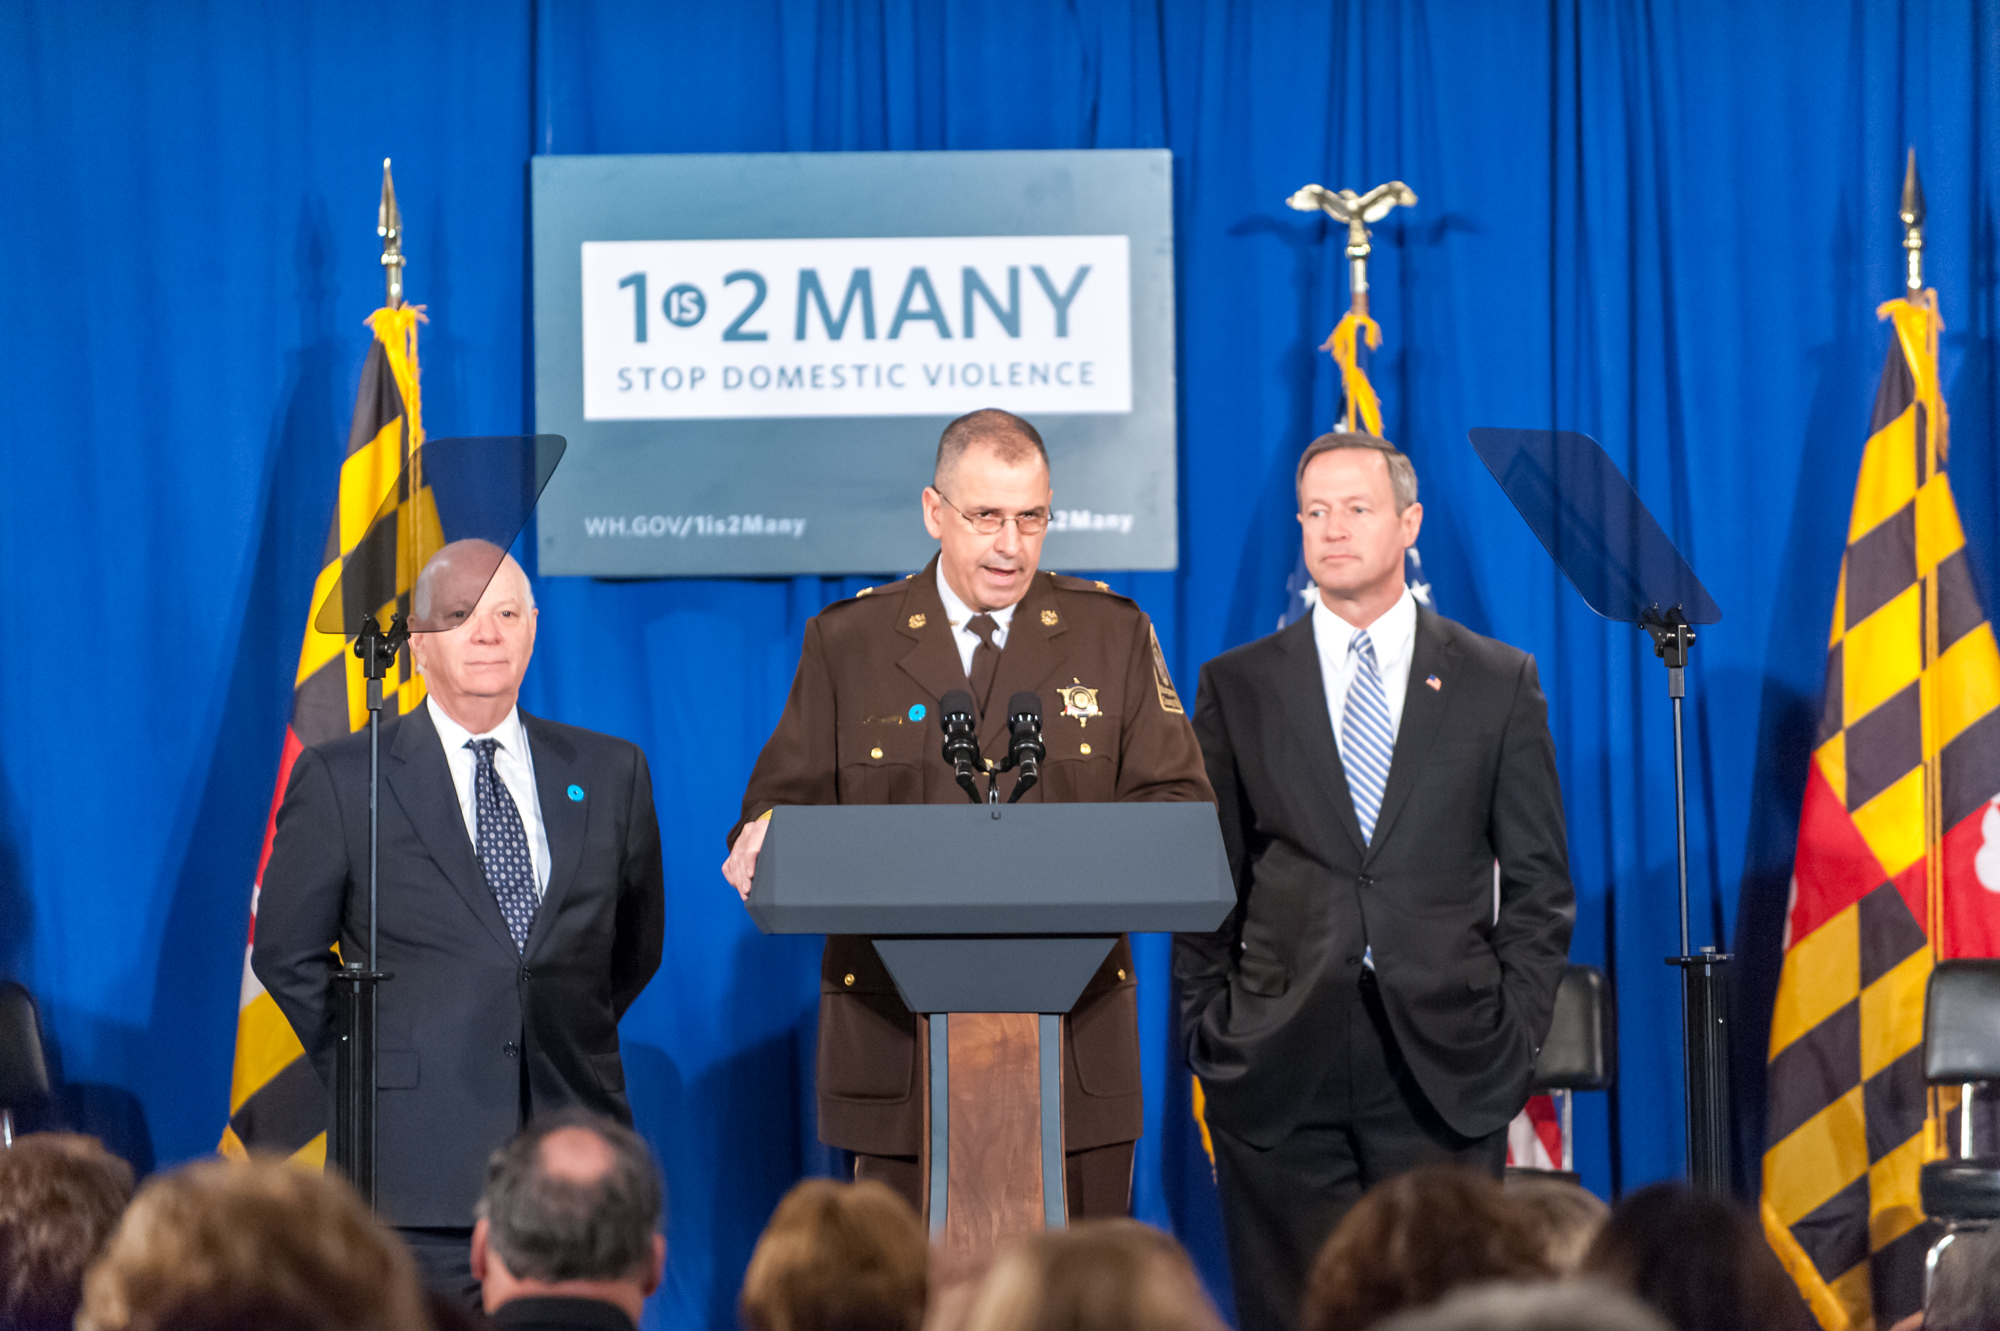 Photo: Montgomery County (Md.) Sheriff Darren Popkin discusses the problem of domestic violence homicide. Photo Credit: Lonnie Tague for the Department of Justice